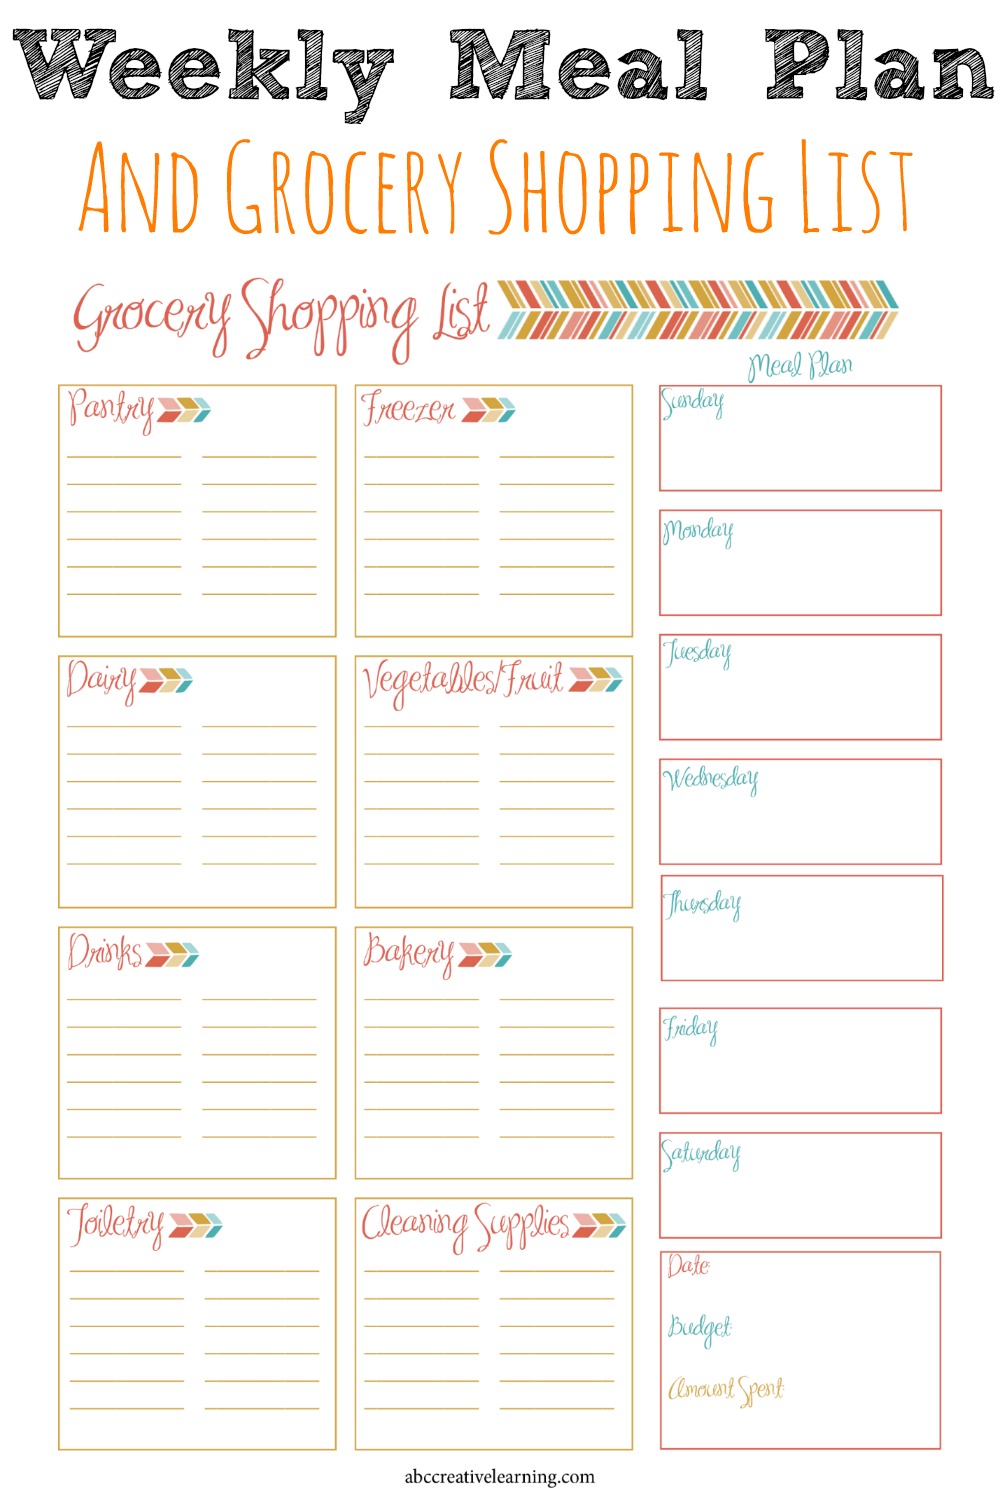 monthly-and-weekly-meal-plan-with-grocery-lists-and-recipes-meal-www